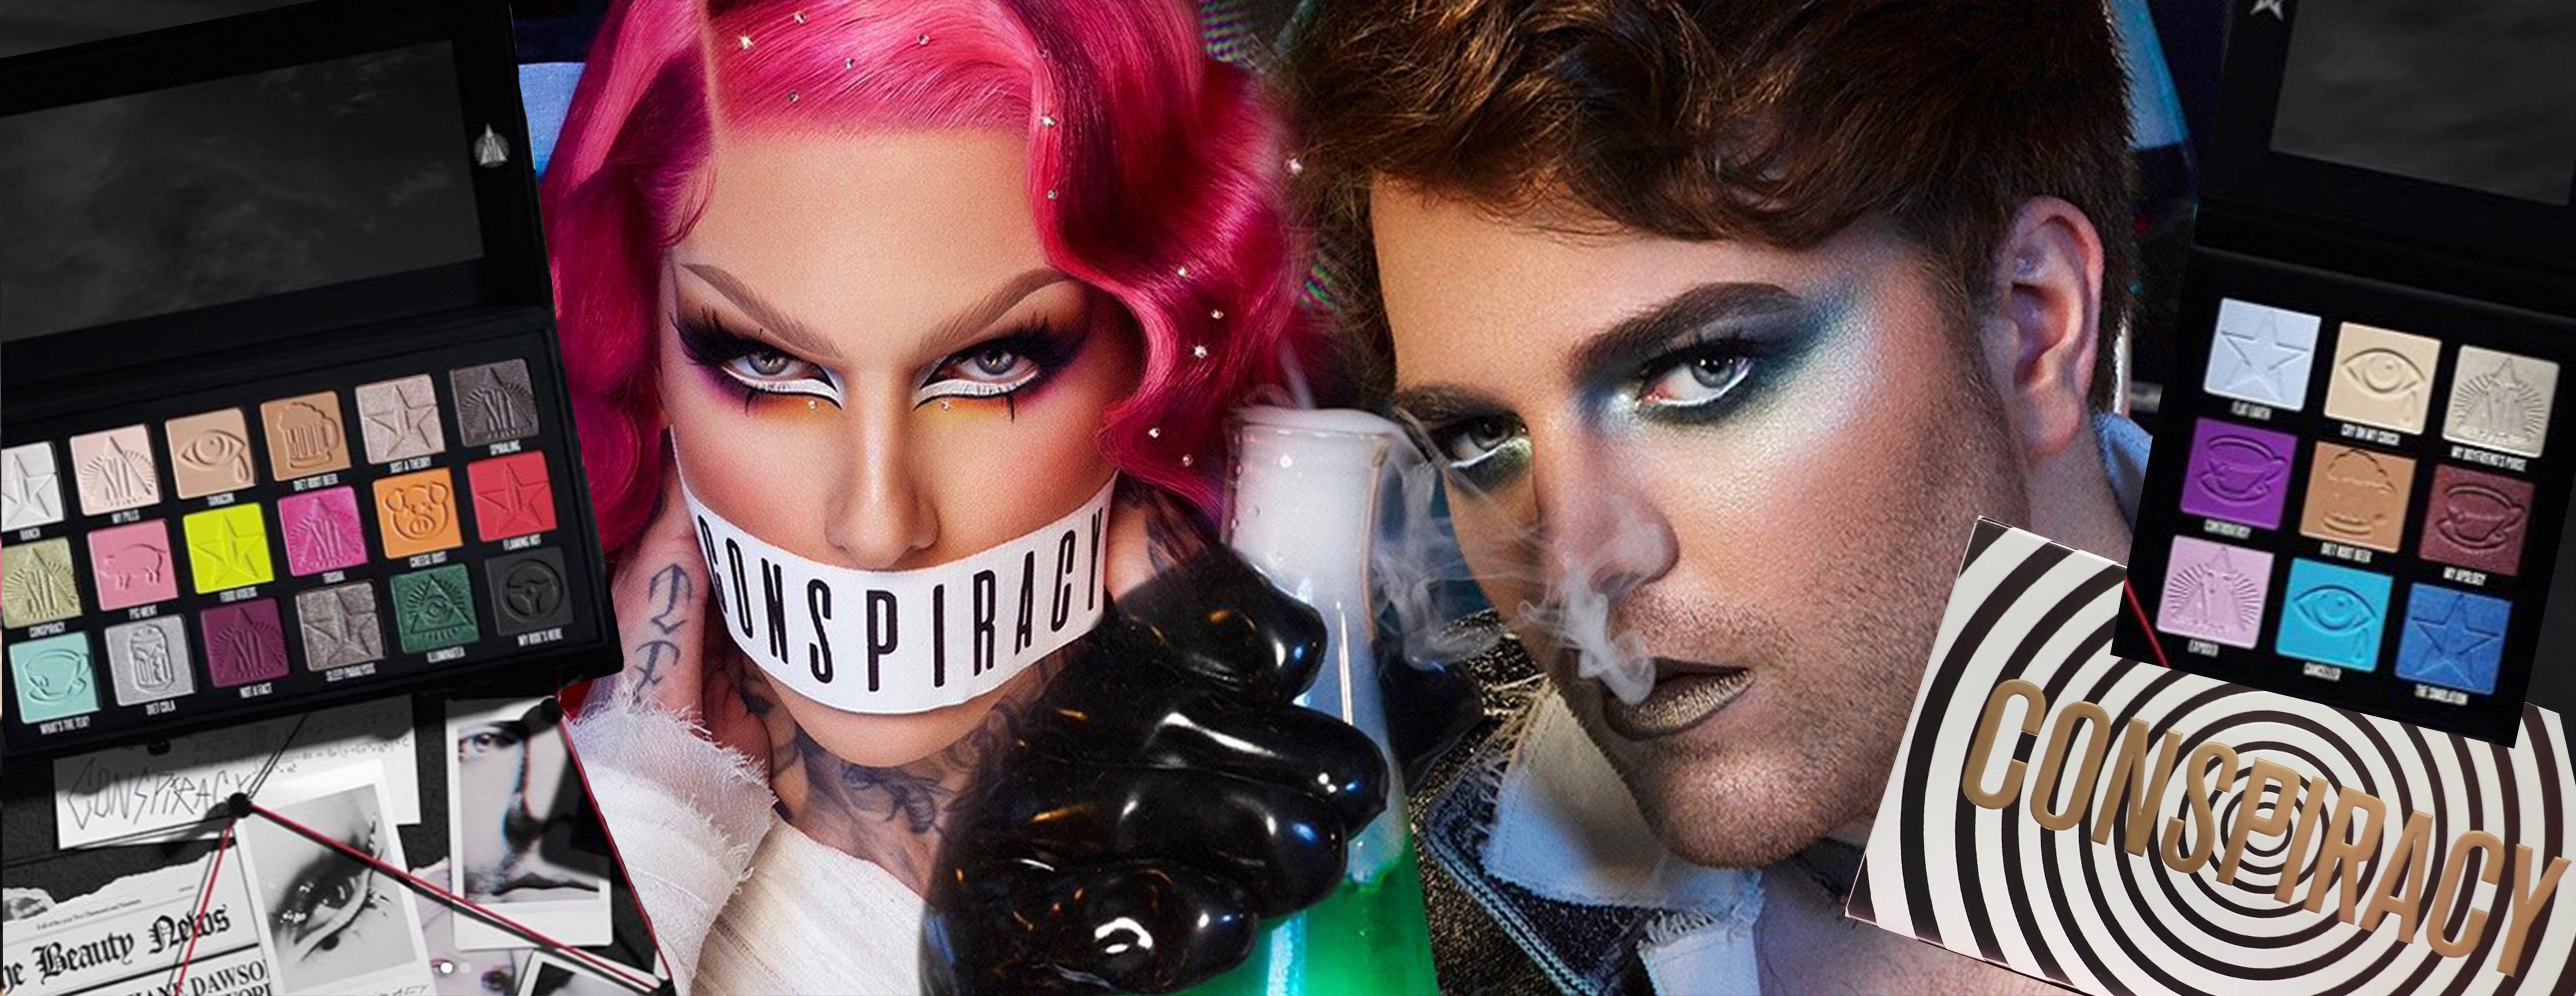 Jeffree Star Cosmetics Launches New Palette In Collaboration With... Shane Dawson!2576 x 996